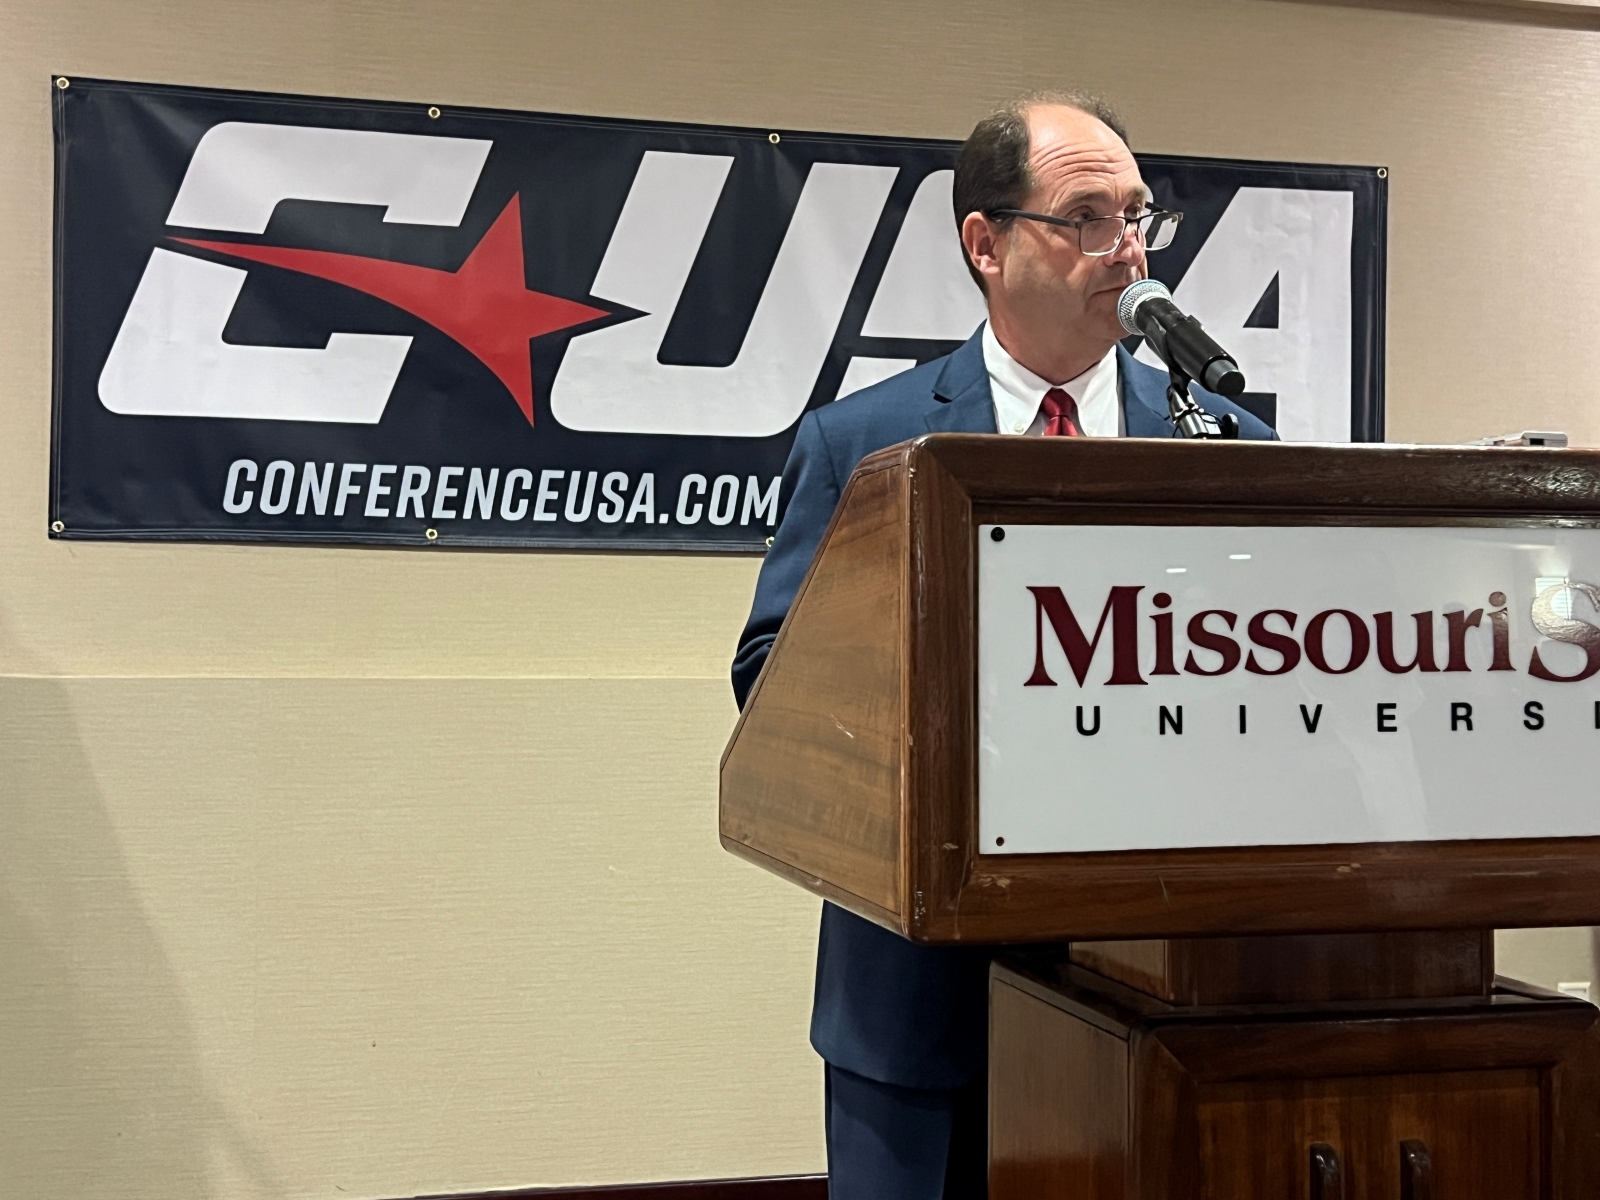 Missouri State athletics director Kyle Moats stands behind a podium with a sign reading "Missouri State University" and in front of a blue banner with the Conference USA logo printed on it.